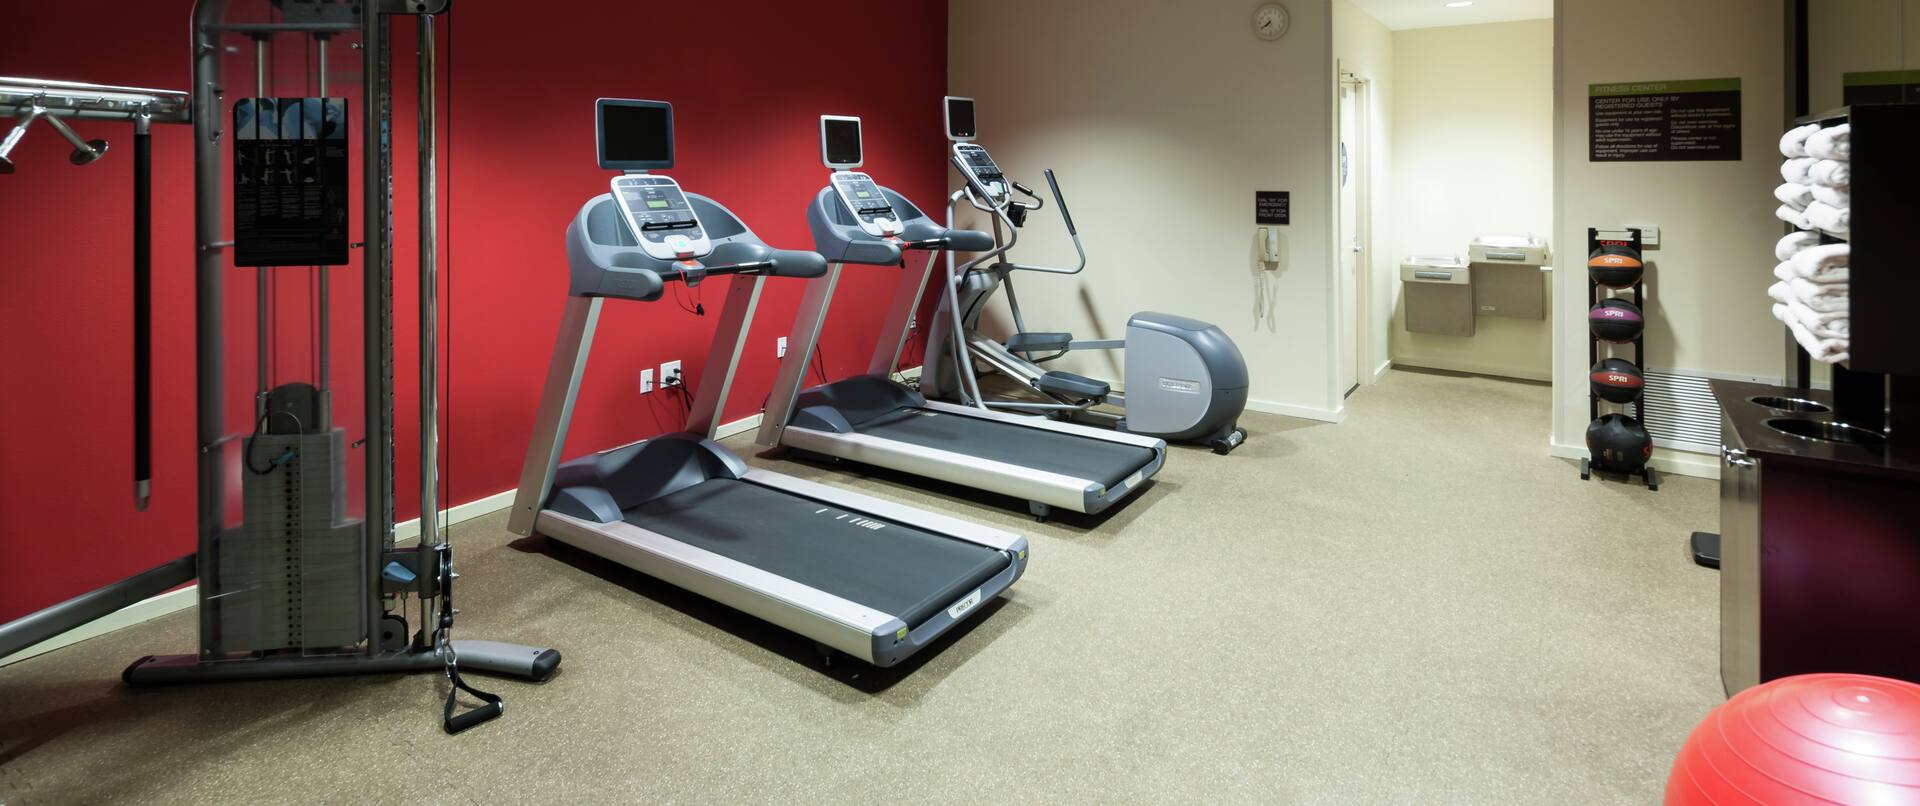 24-Hour Fitness Room with Weights and Cardio Equipment